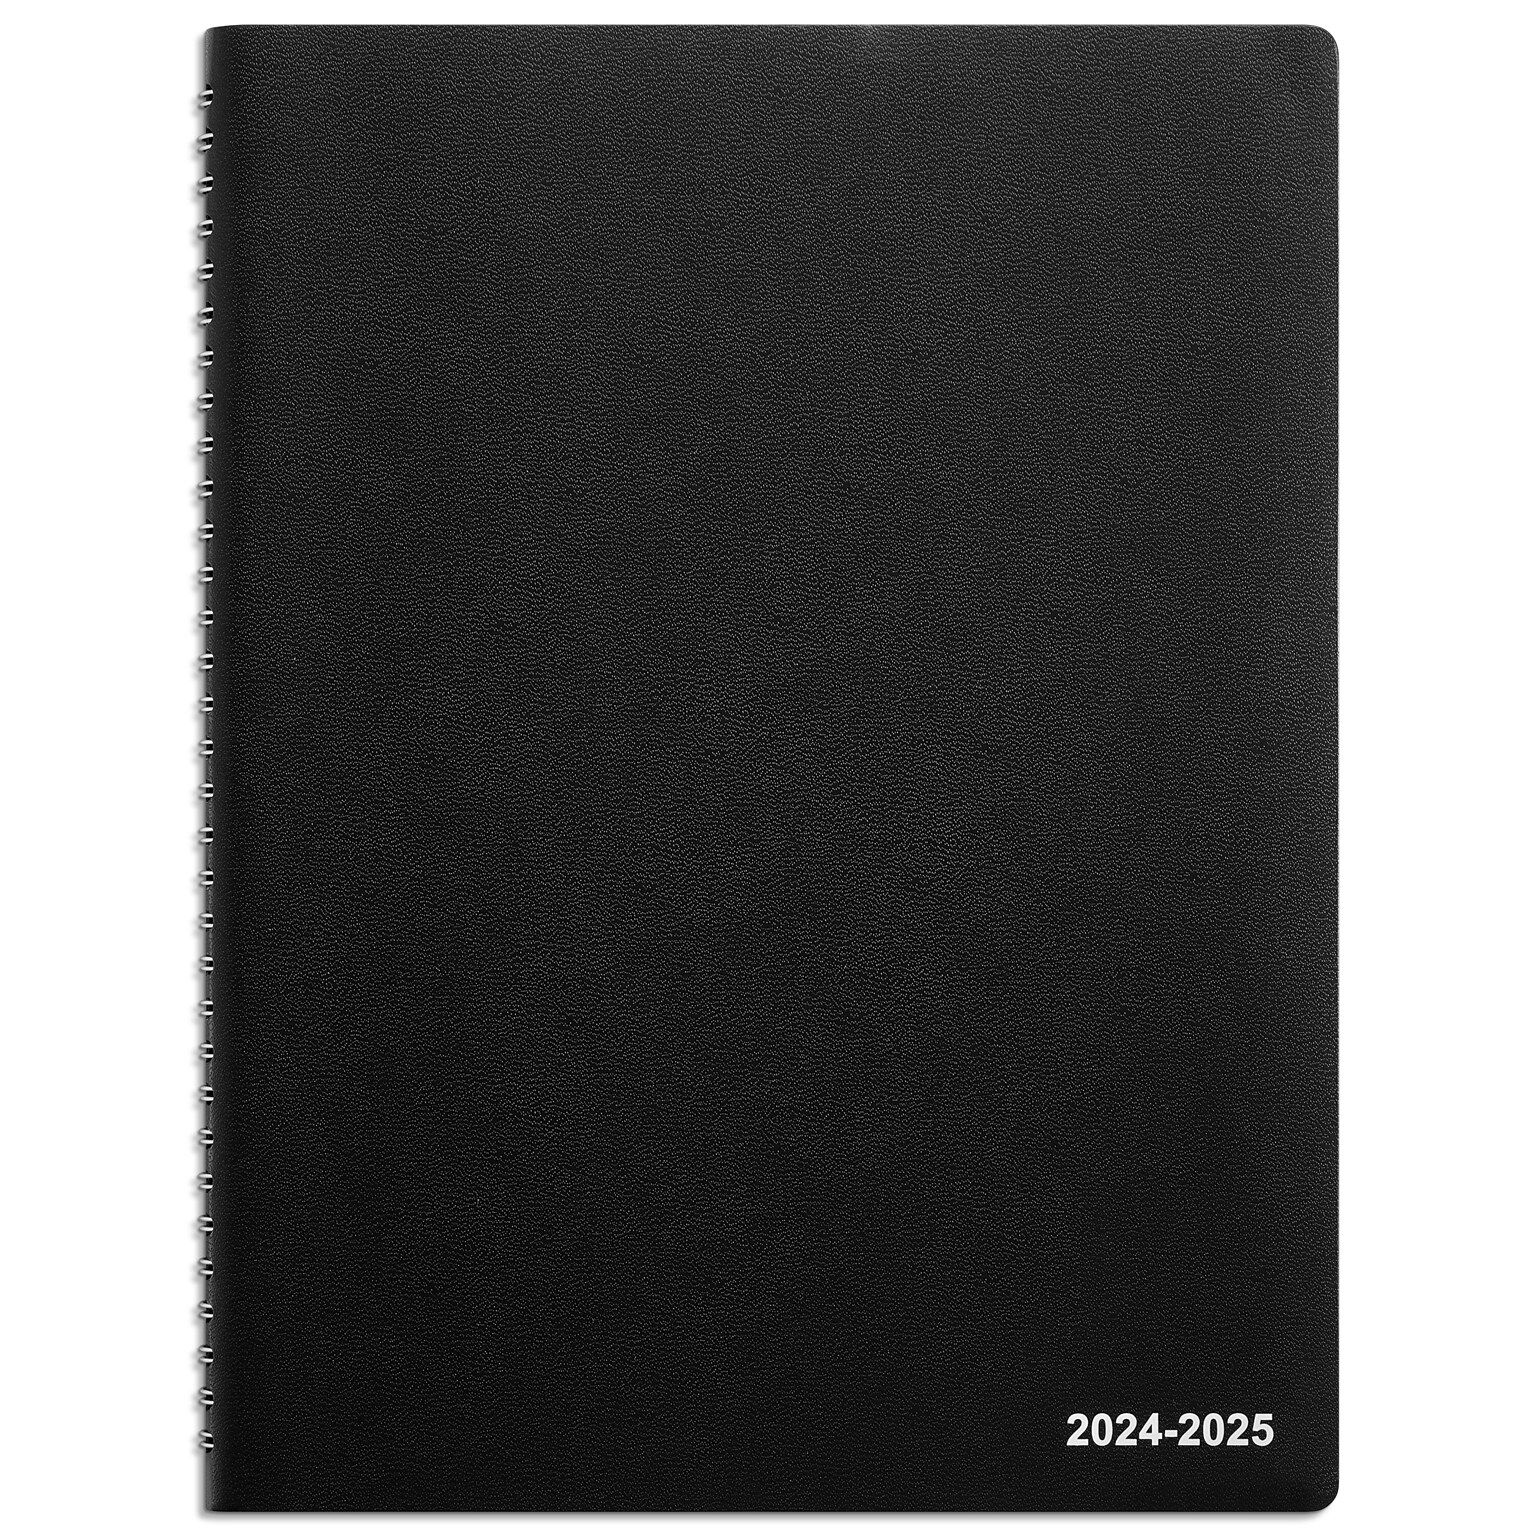 2024-2025 Staples 8 x 11 Academic Weekly & Monthly Planner, Faux Leather Cover, Black (ST23572-23)